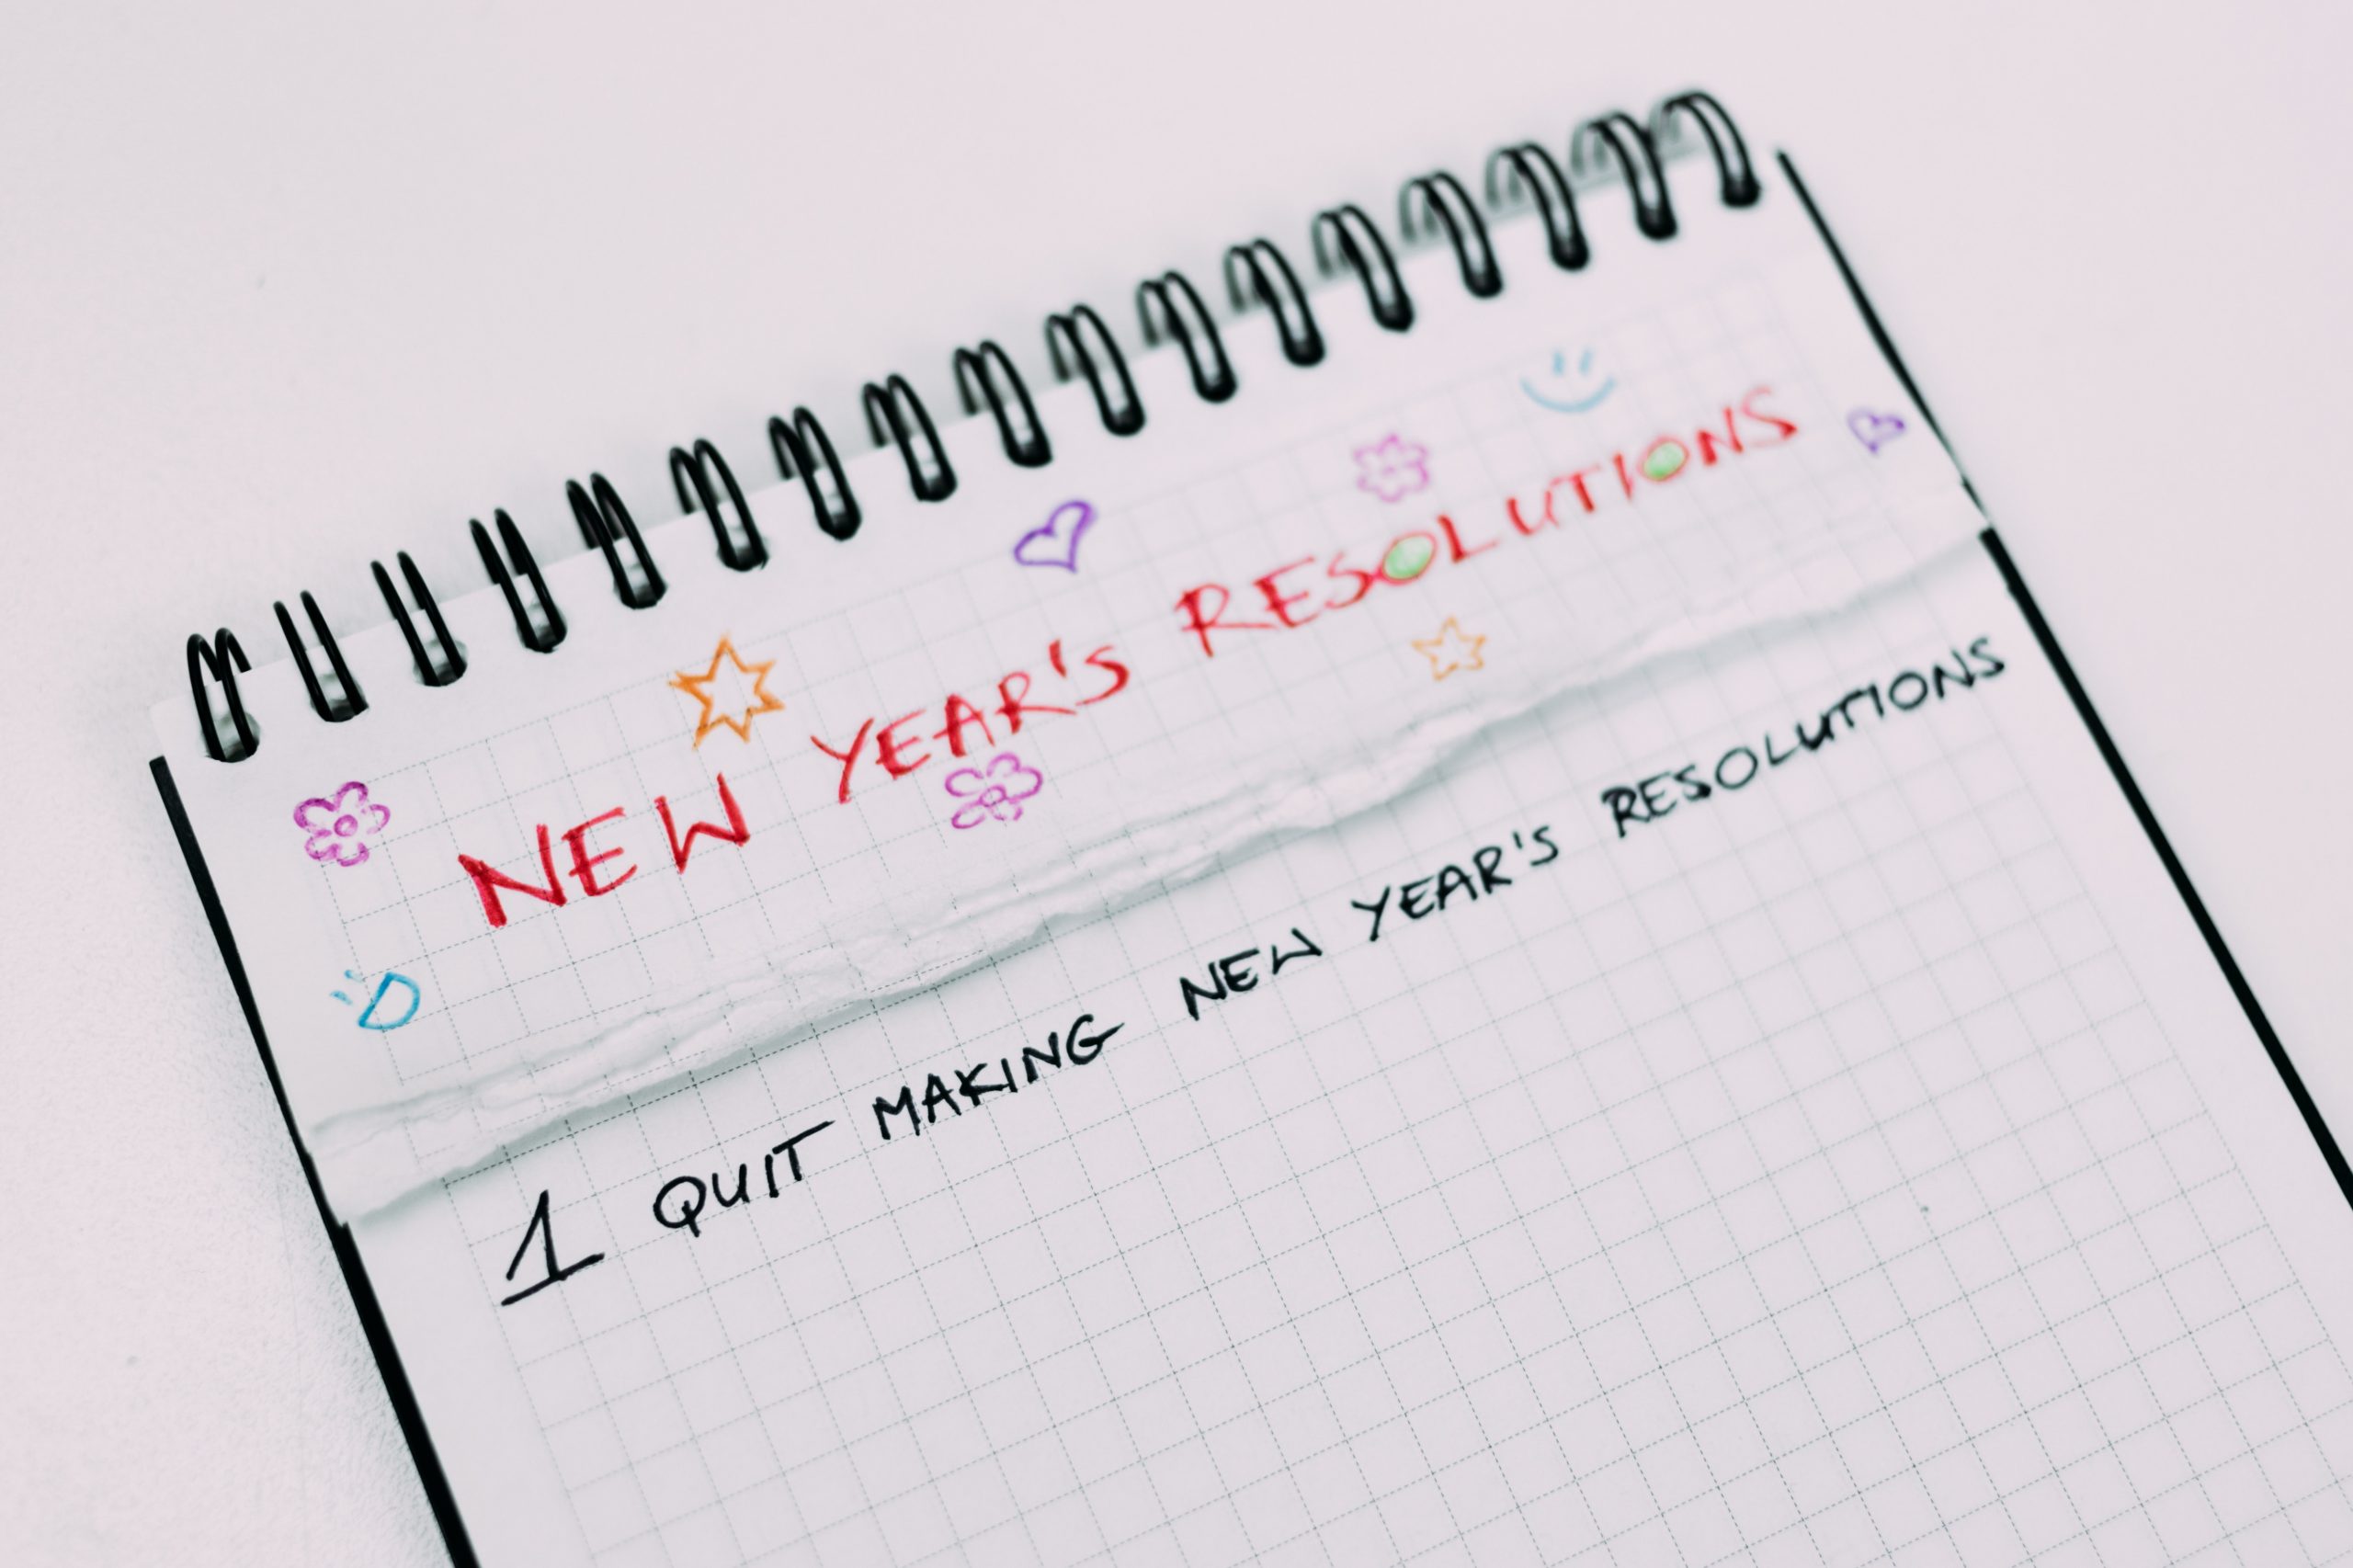 Notepad with New Year's resolutions on it